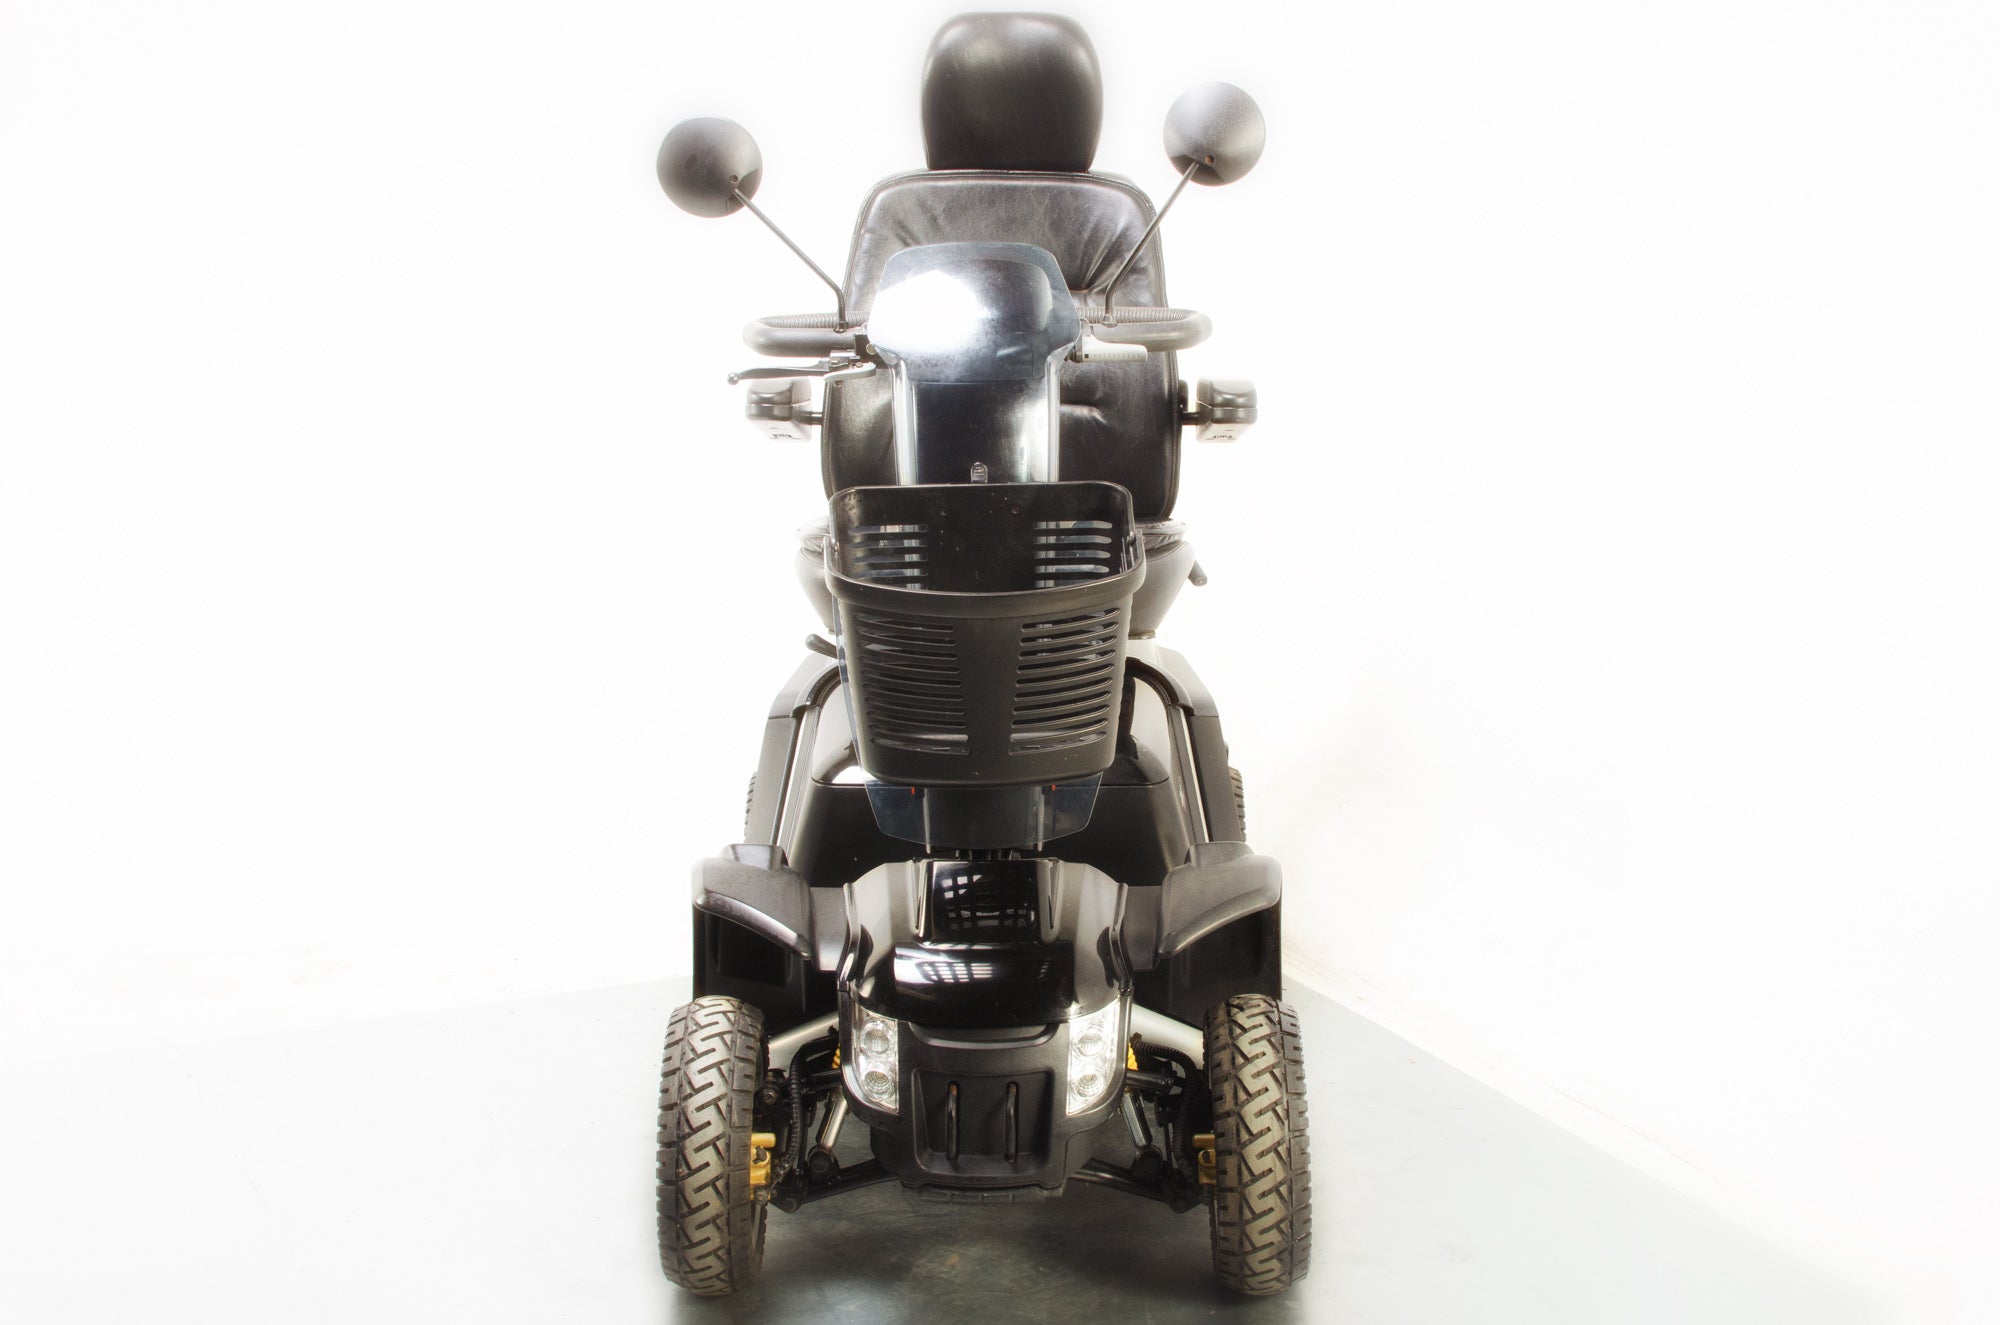 Pride Colt Executive Large All Terrain Used Mobility Scooter Off Road